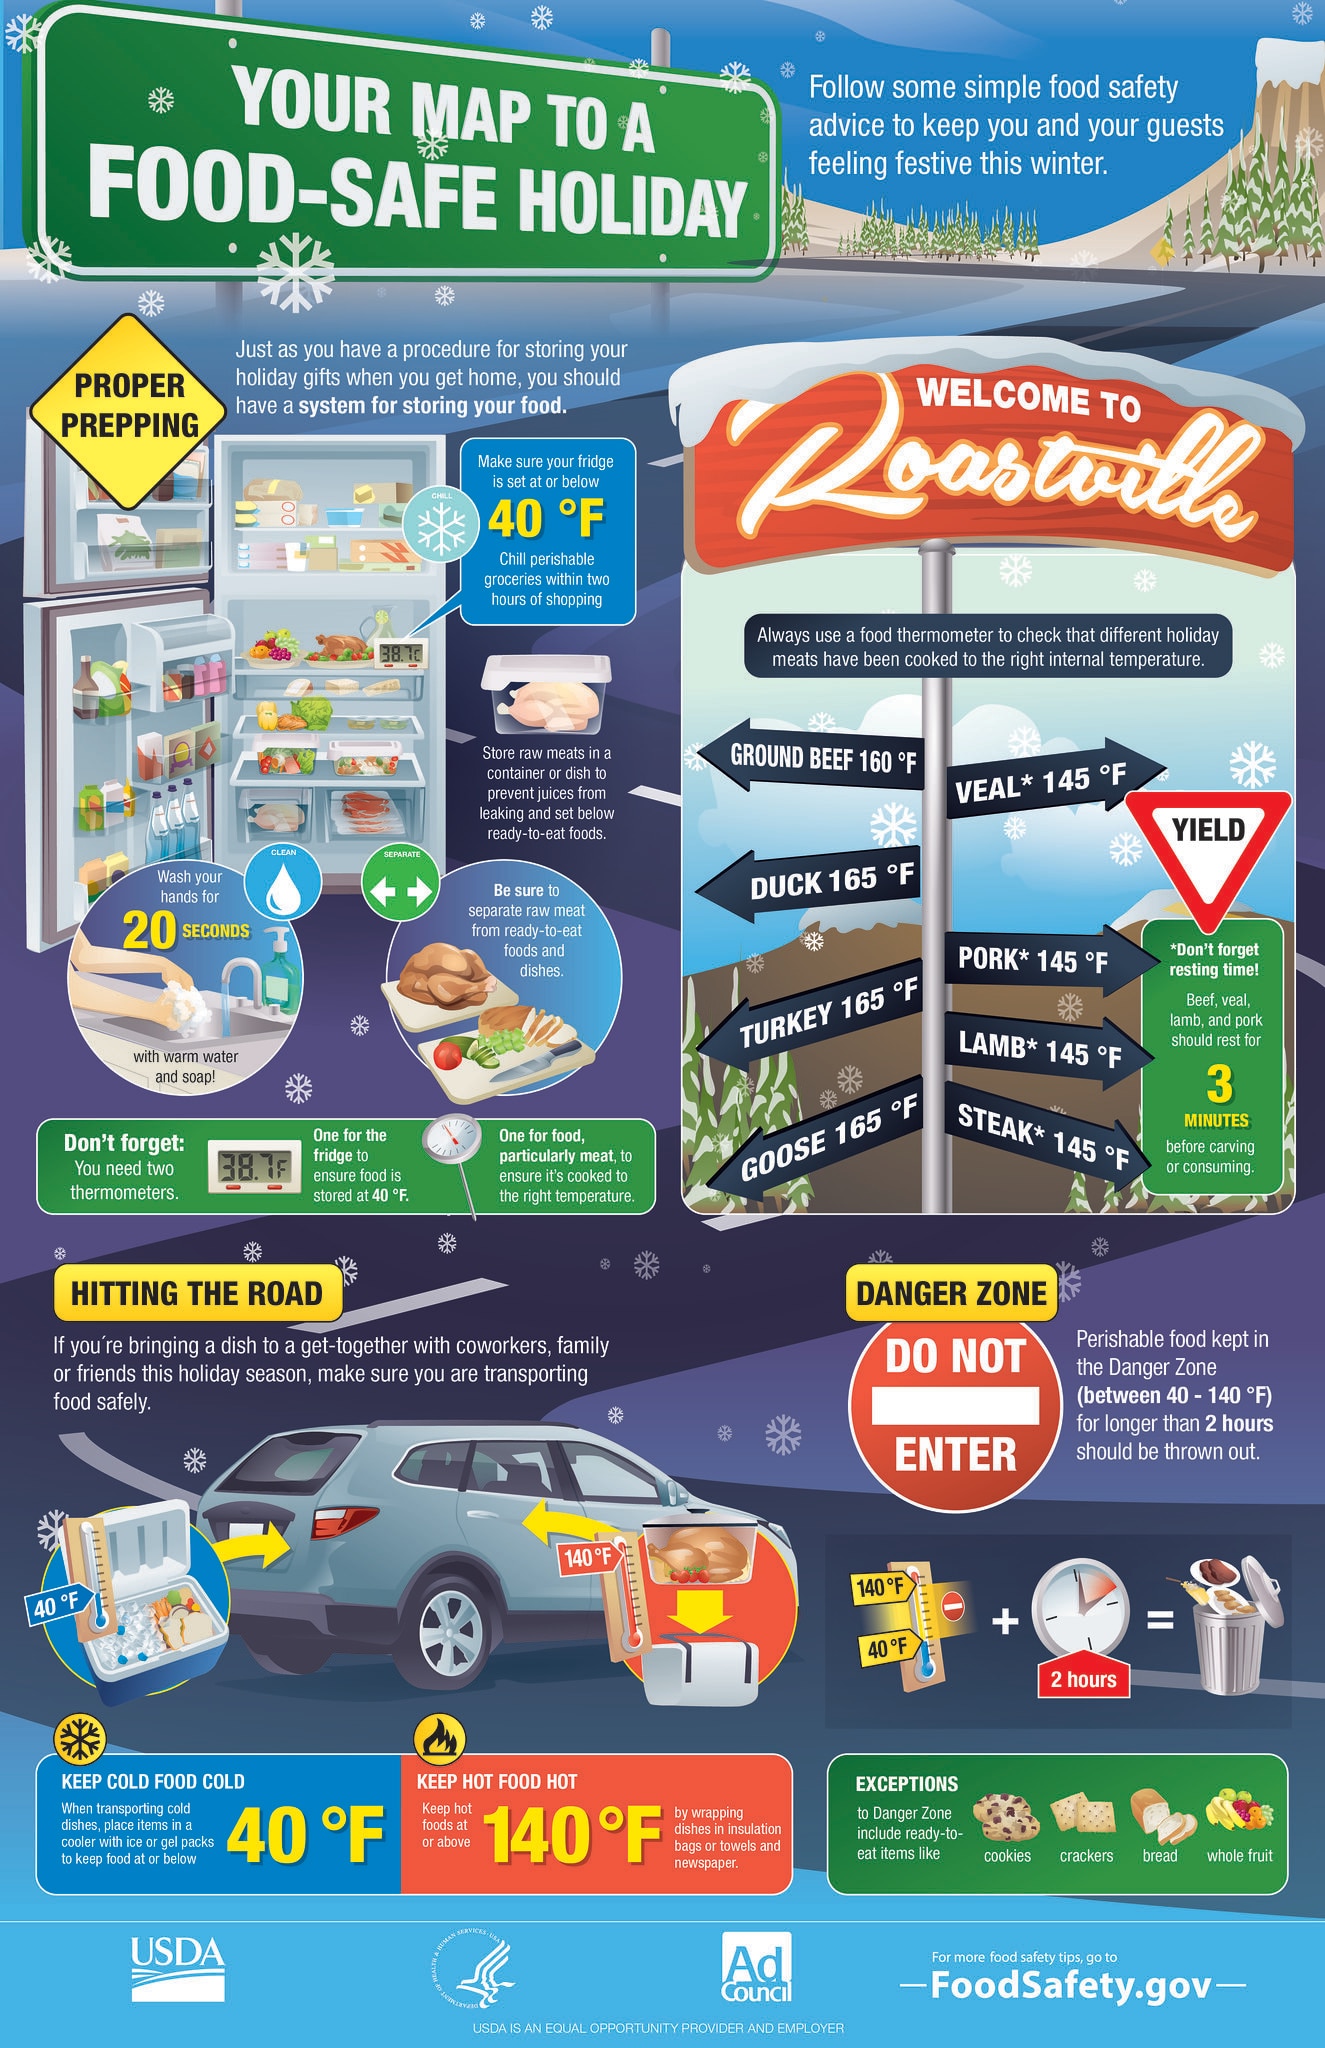 Infographic from FoodSafety.gov with a map for food-safe holidays and tips for prepping and traveling with food.